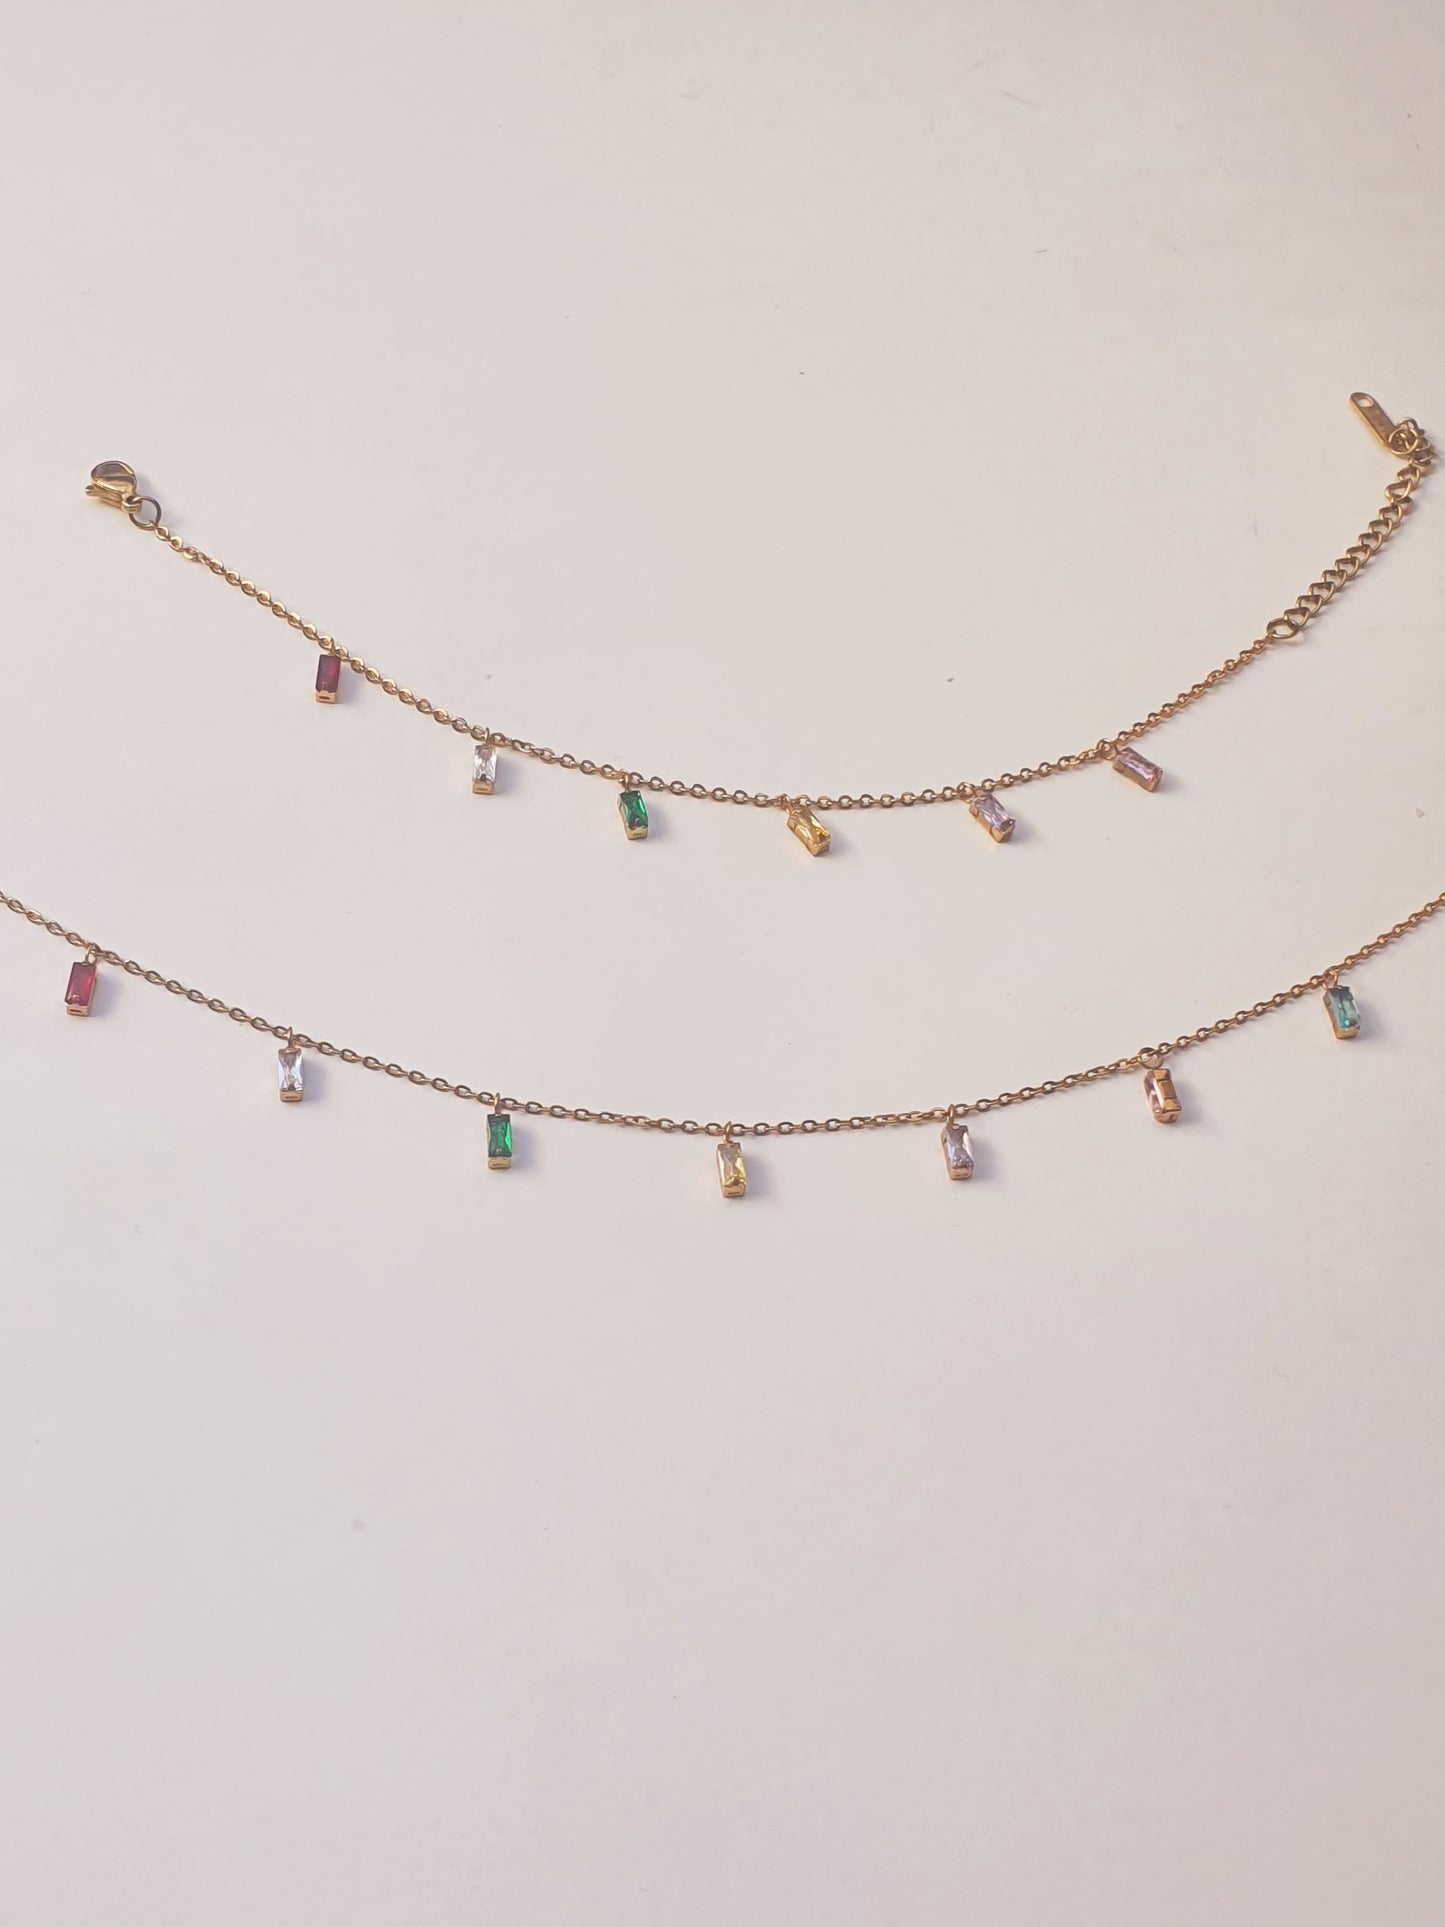 A dainty gold necklace with dangling gems in multiple colours and a matching bracelet above it